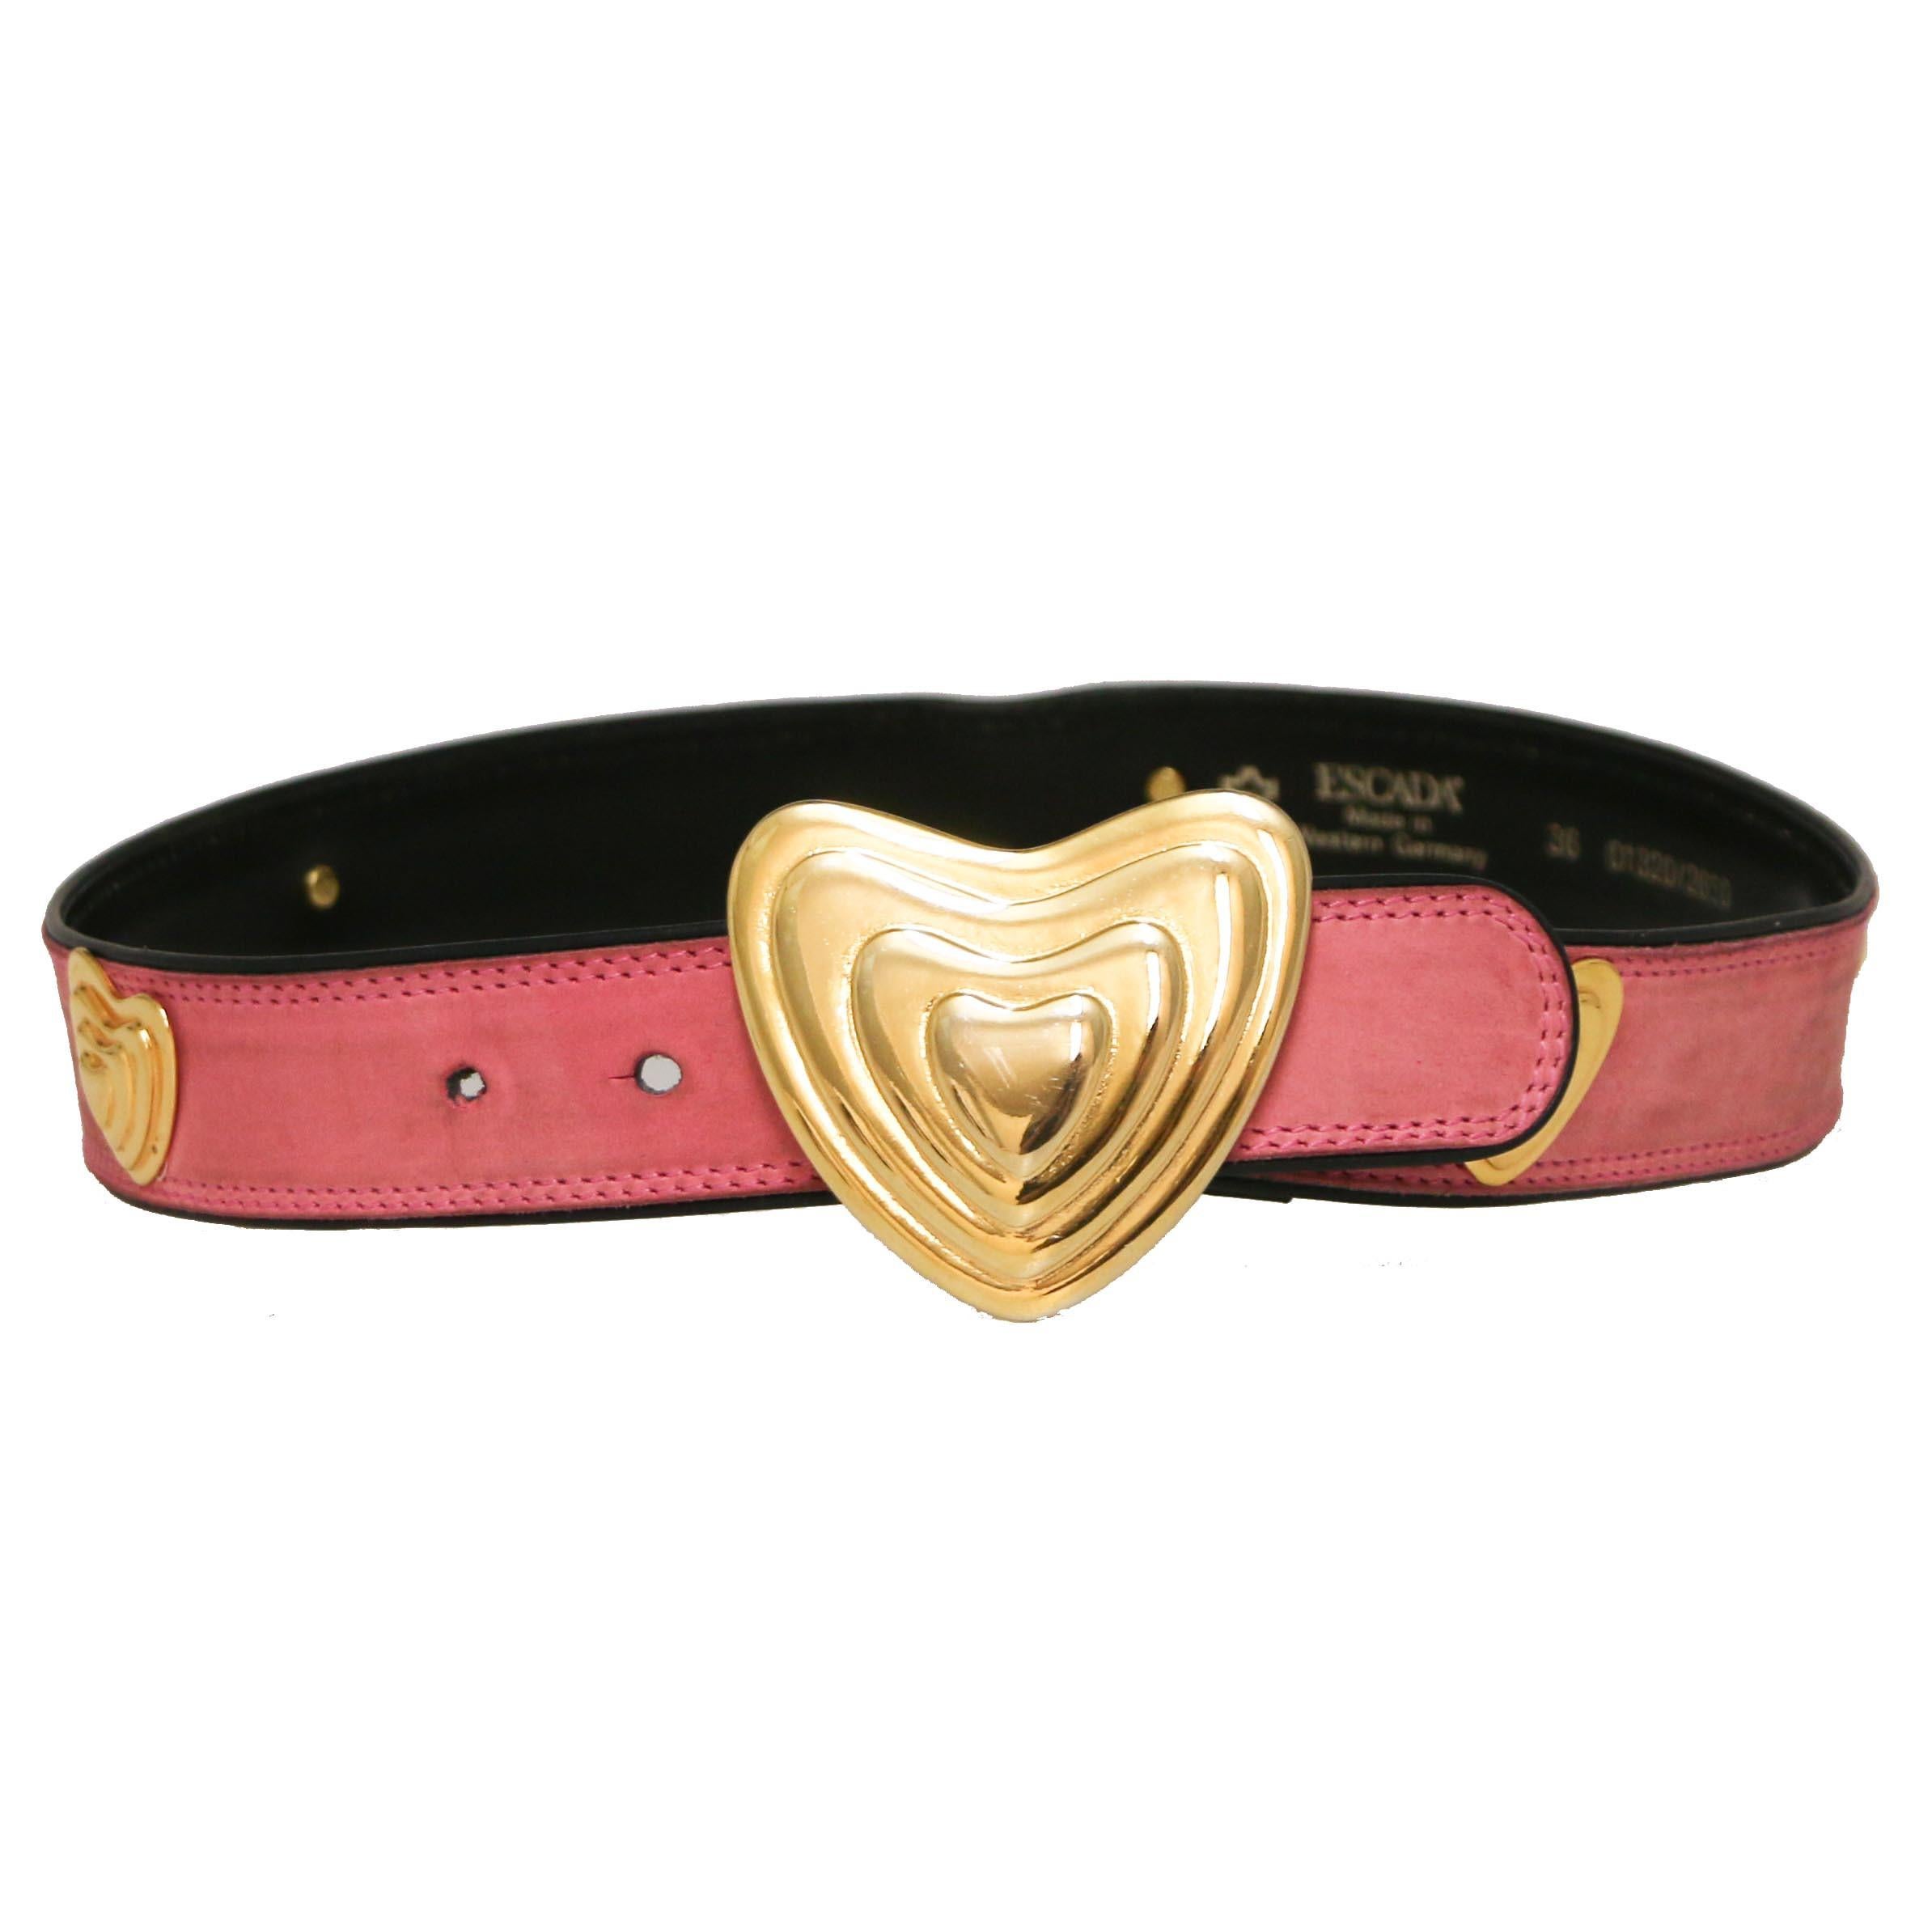 ESCADA Vintage Belt in Pink Leather. the hardware is in golden metal.
In good condition (needs cleaning).
Made in Germany.
Size: to the last hole 70 cm
Series 01320/2650
Dimensions: 70 x 3 cm - the heart buckle is huge 7 x 6 cm.
Will be delivered in